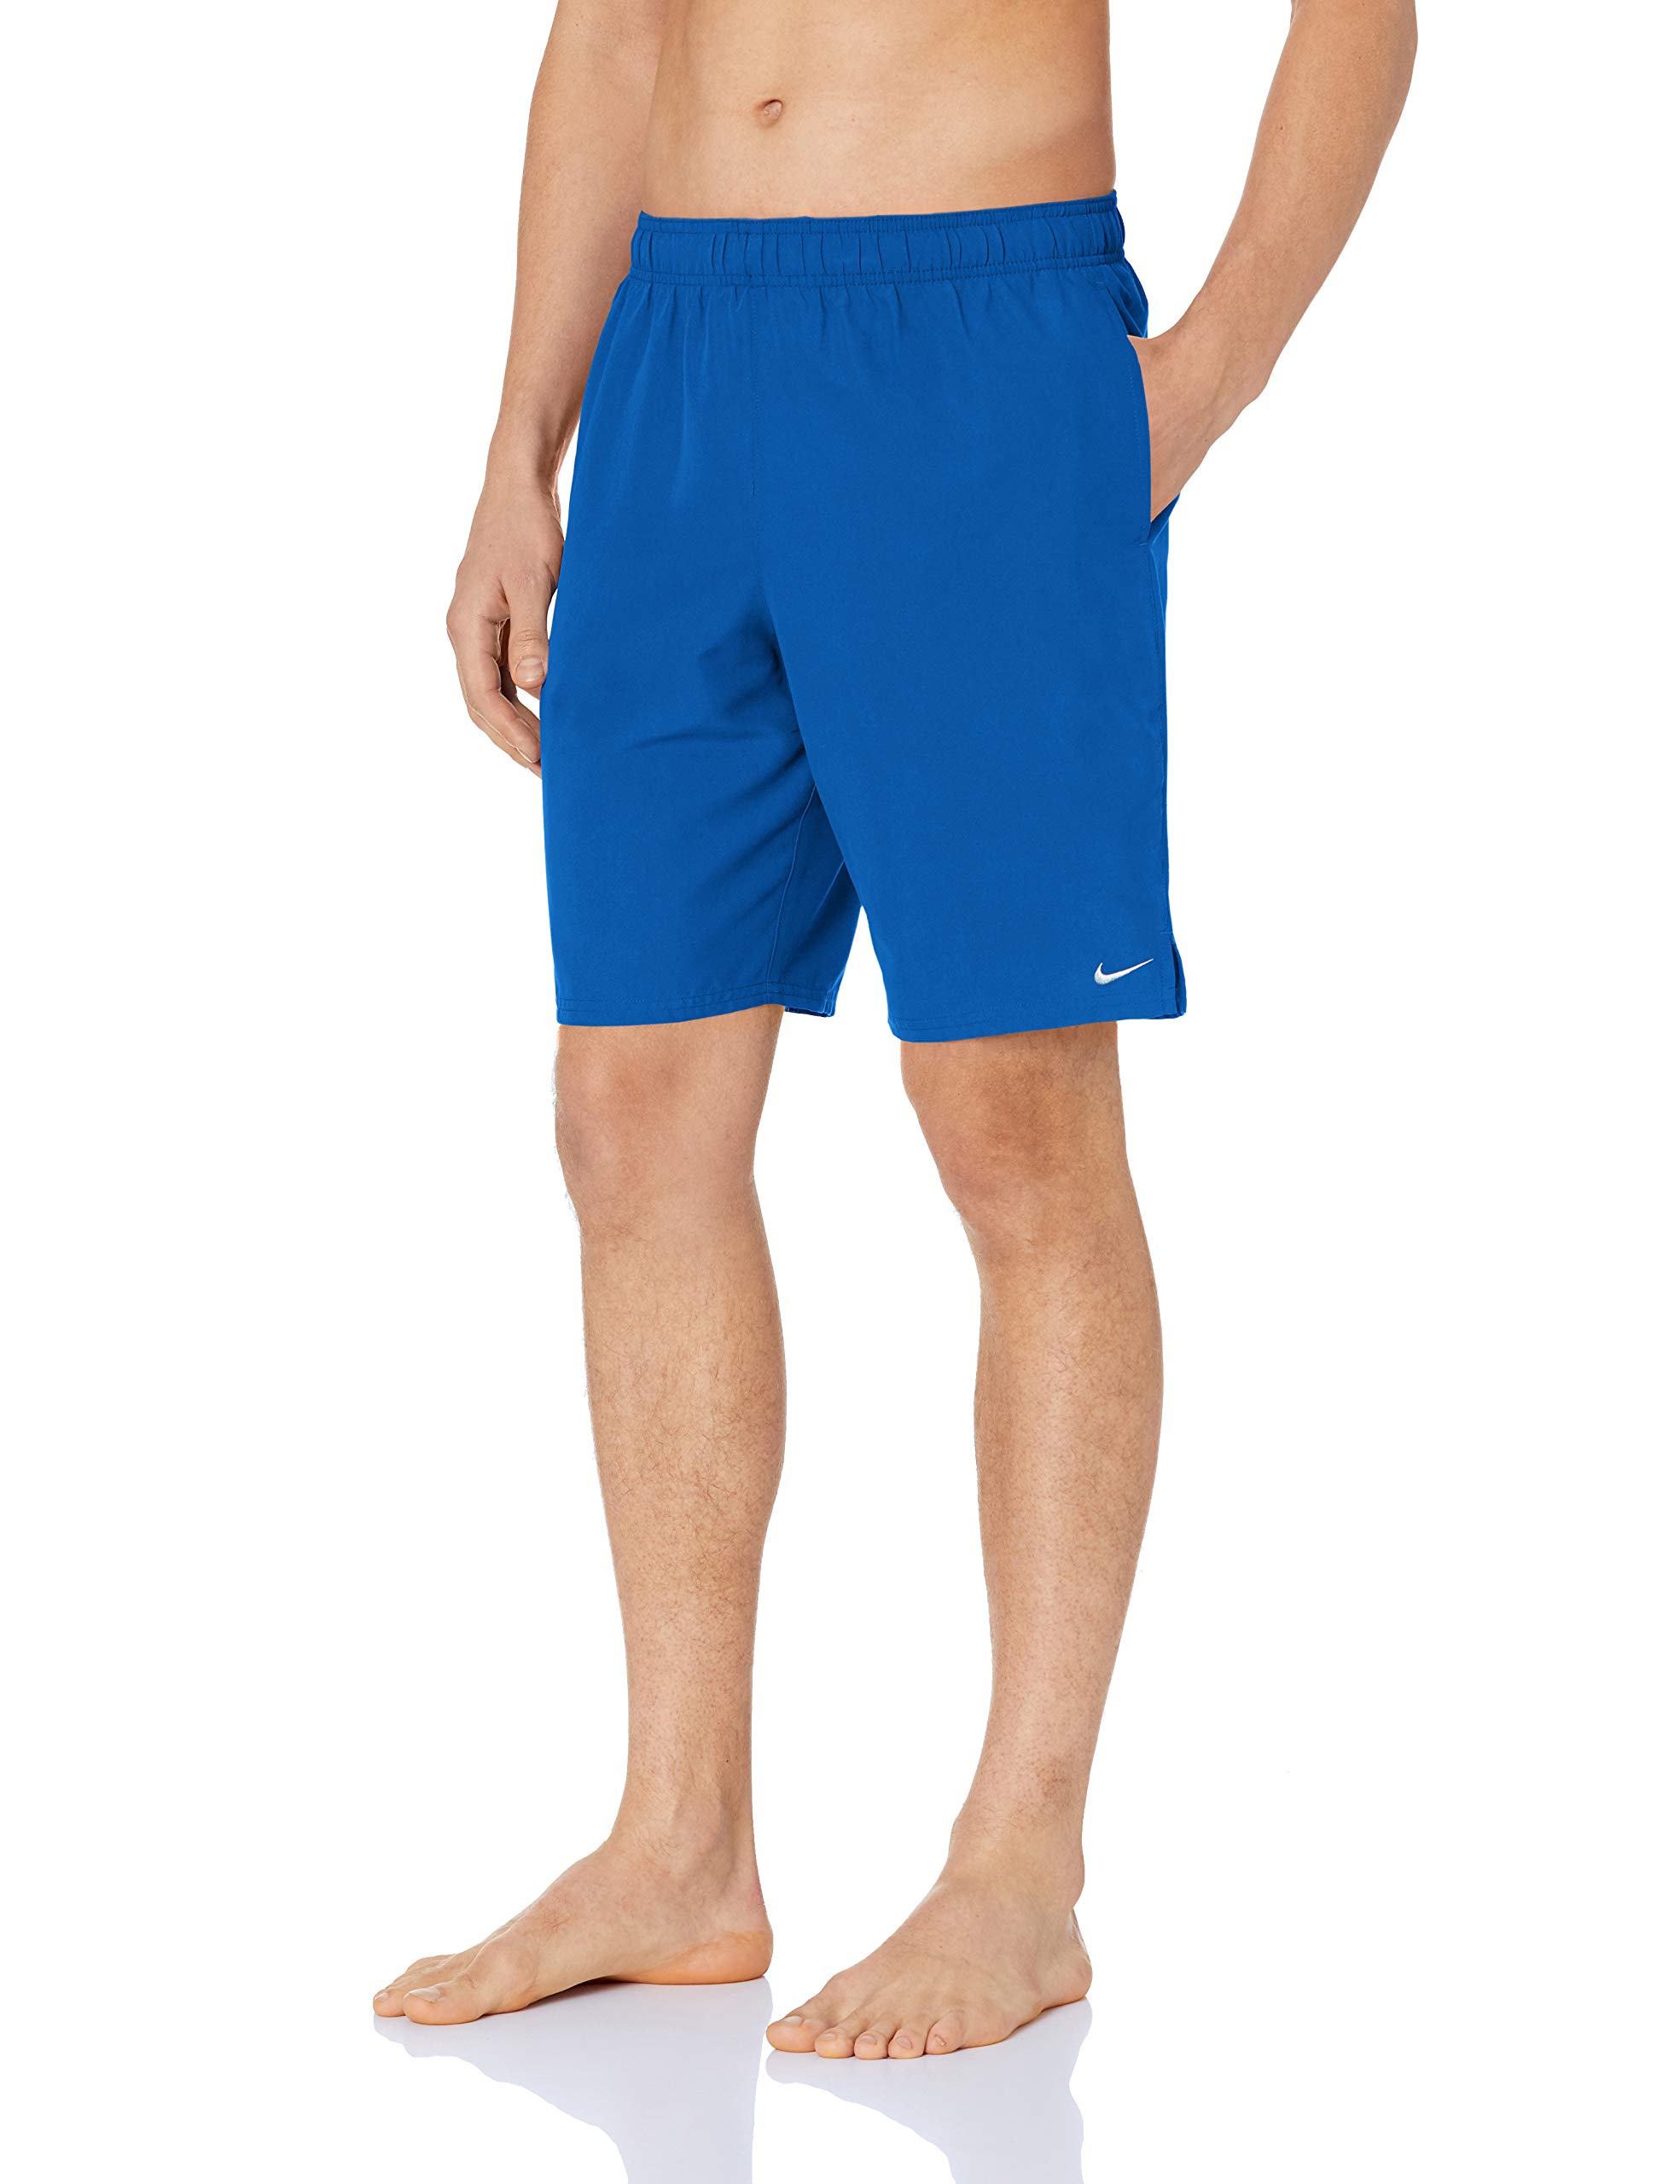 Nike Mens Solid Lap 9 Inch Volley Short Swim Trunk - Game Royal White - XL